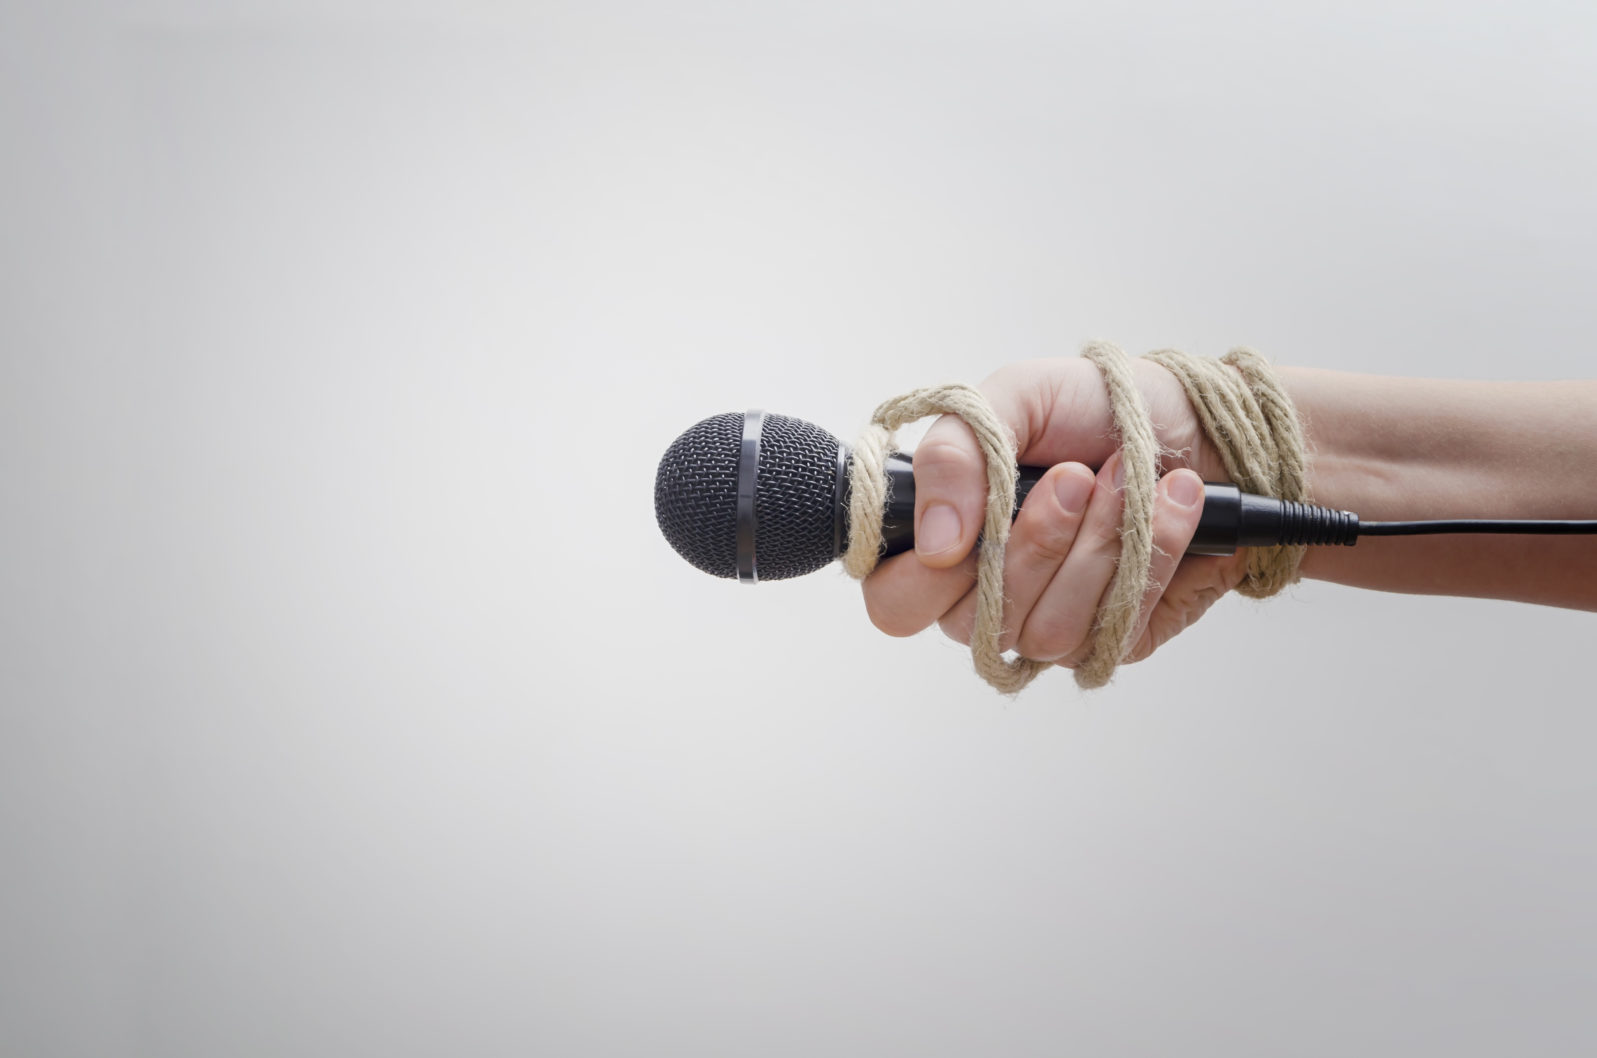 Hand with microphone tied with rope, depicting the idea of freedom of the press, idea of the repression of the mass media or freedom of expression